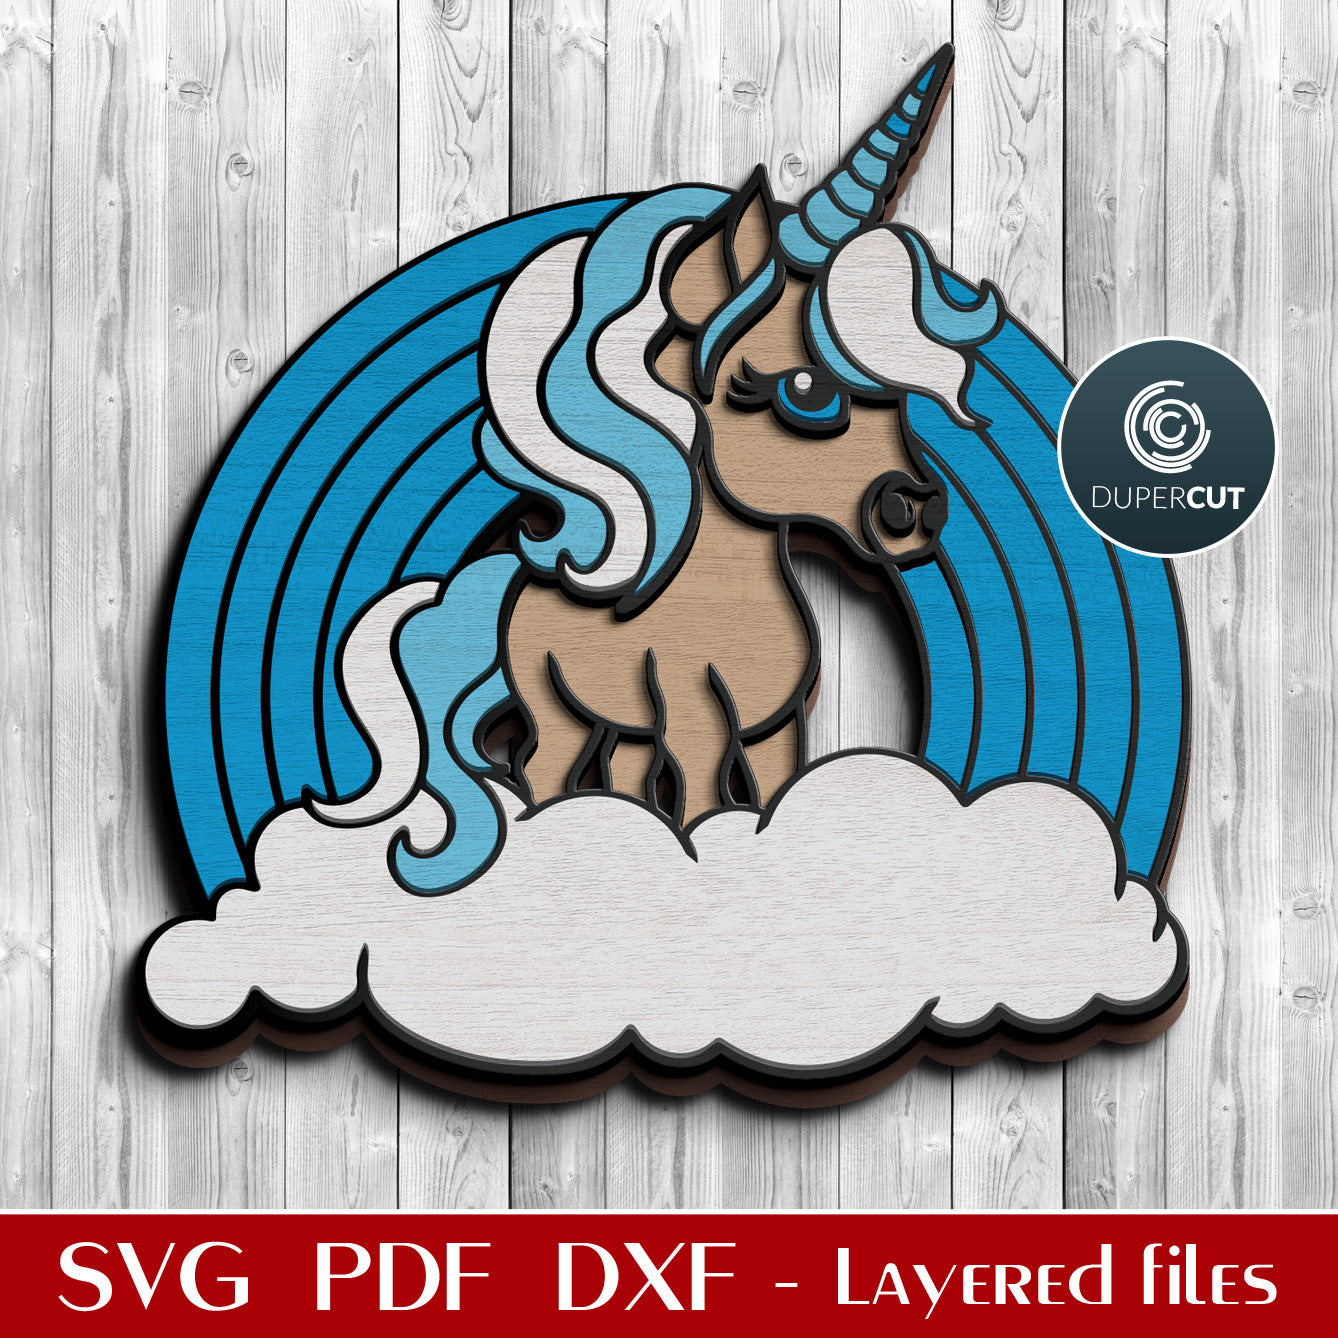 Cute unicorn with rainbow, personalized sign - SVG DXF vector laser cutting files for Glowforge, Cricut, Silhouette, CNC plasma machines by www.DuperCut.com